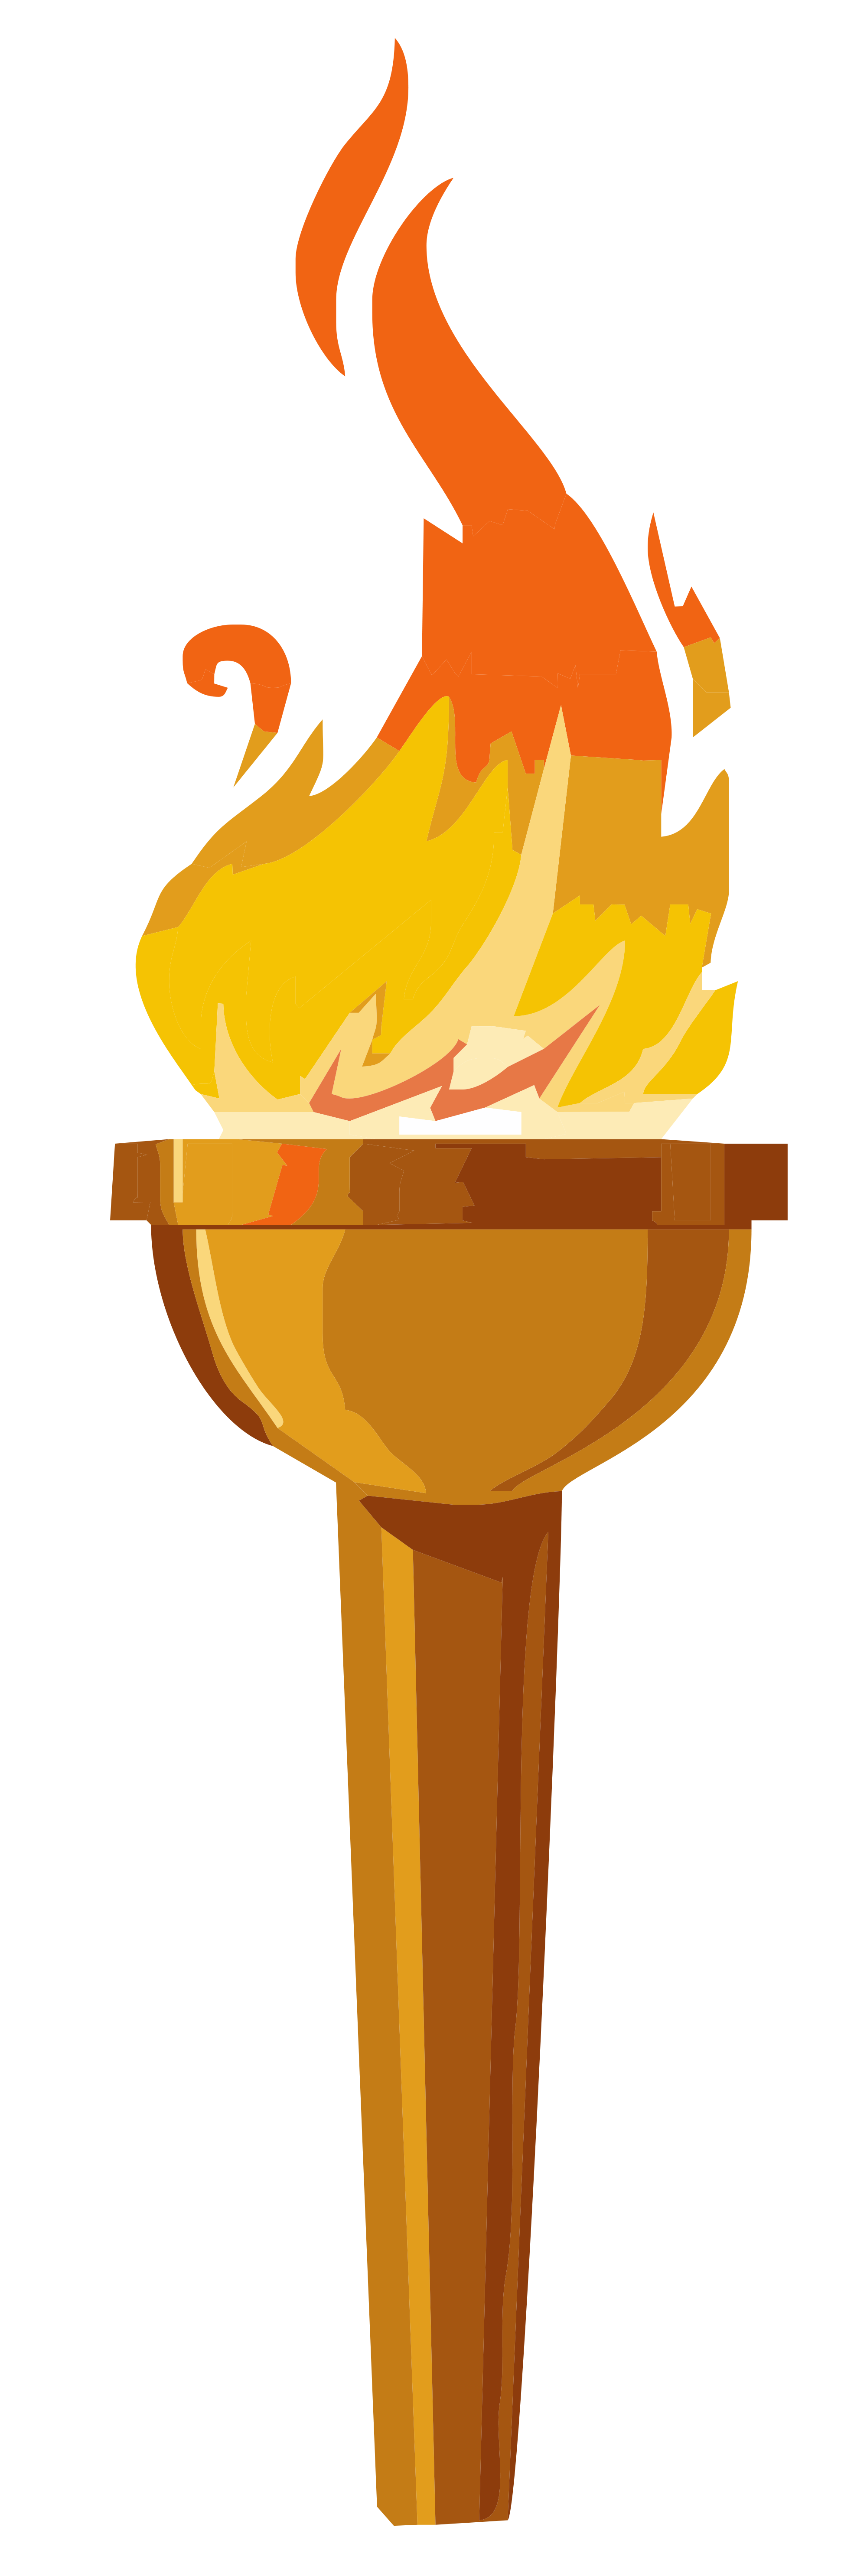 Flames clipart torch.